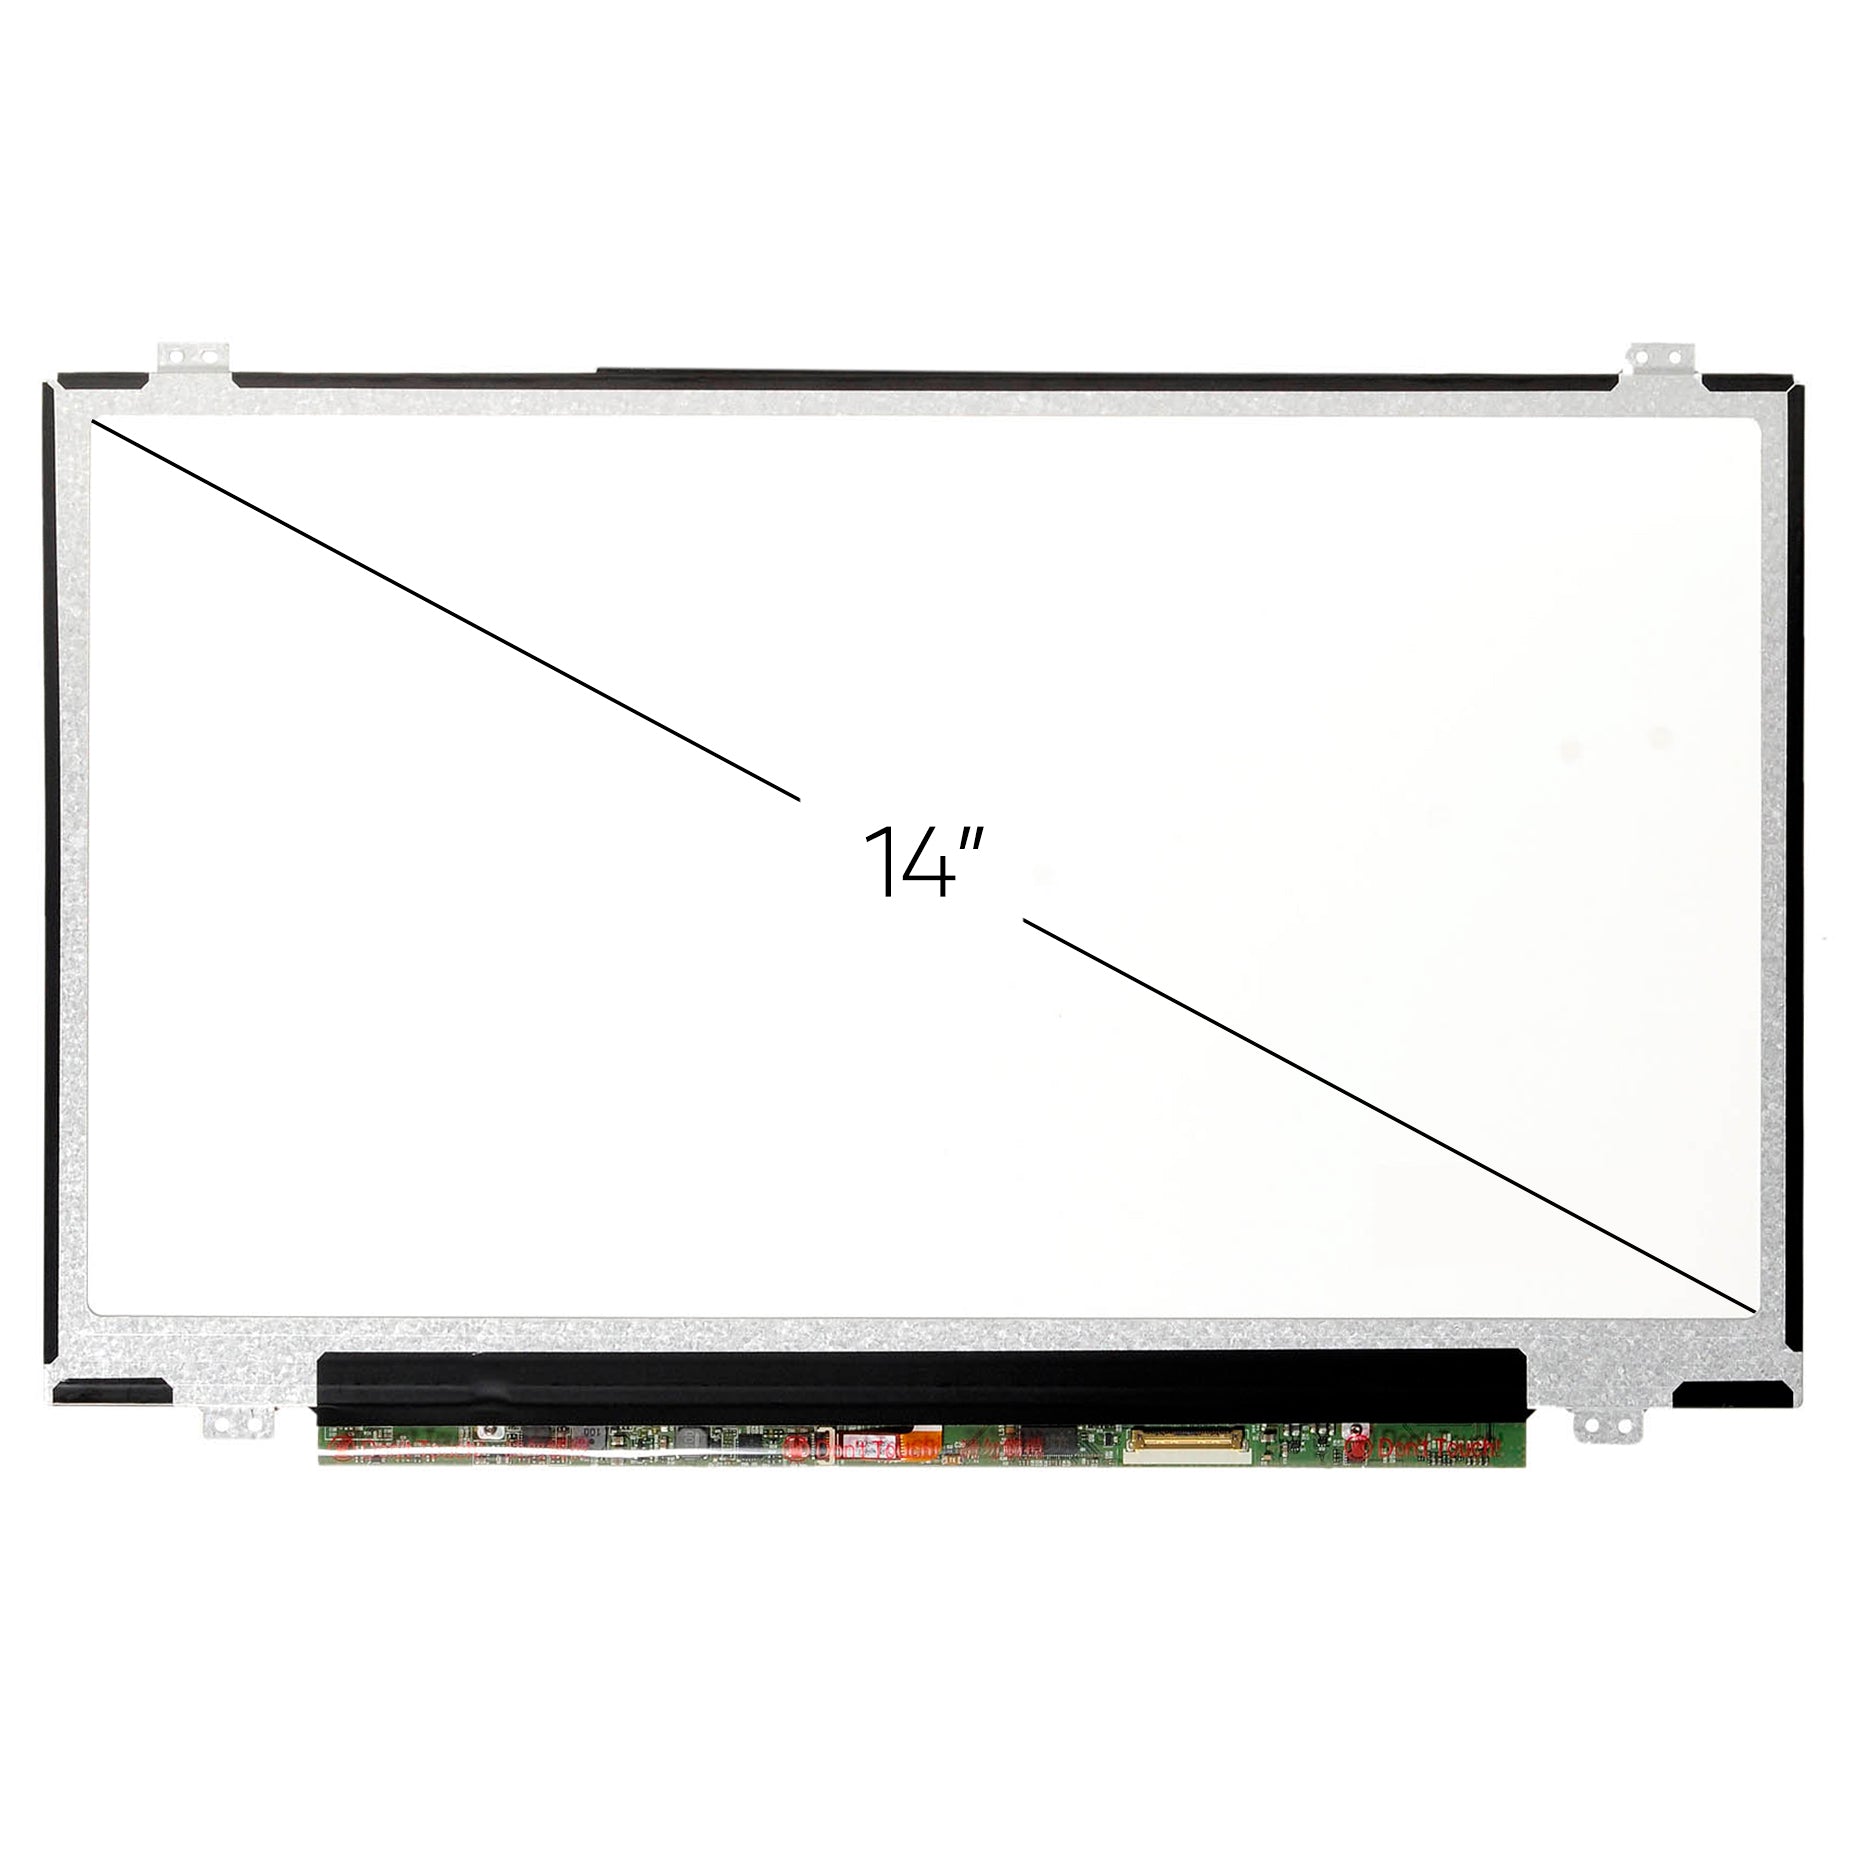 Screen Replacement for Dell Latitude E7450 FHD 1920x1080 Matte LCD LED Display